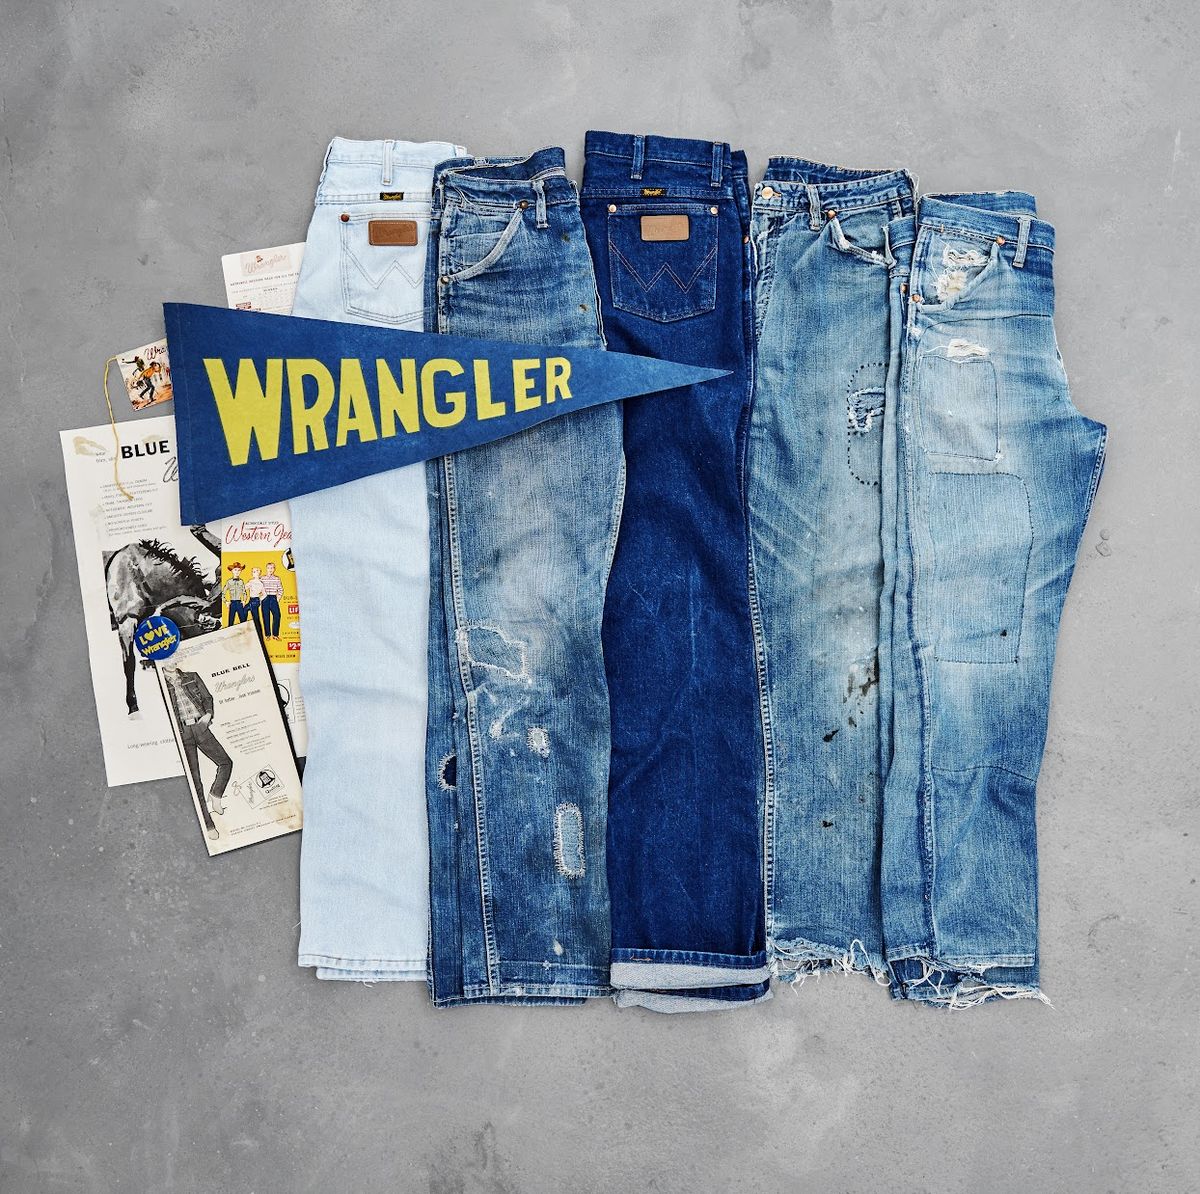 Wrangler Reborn Is Now Selling Vintage Jeans to the Masses